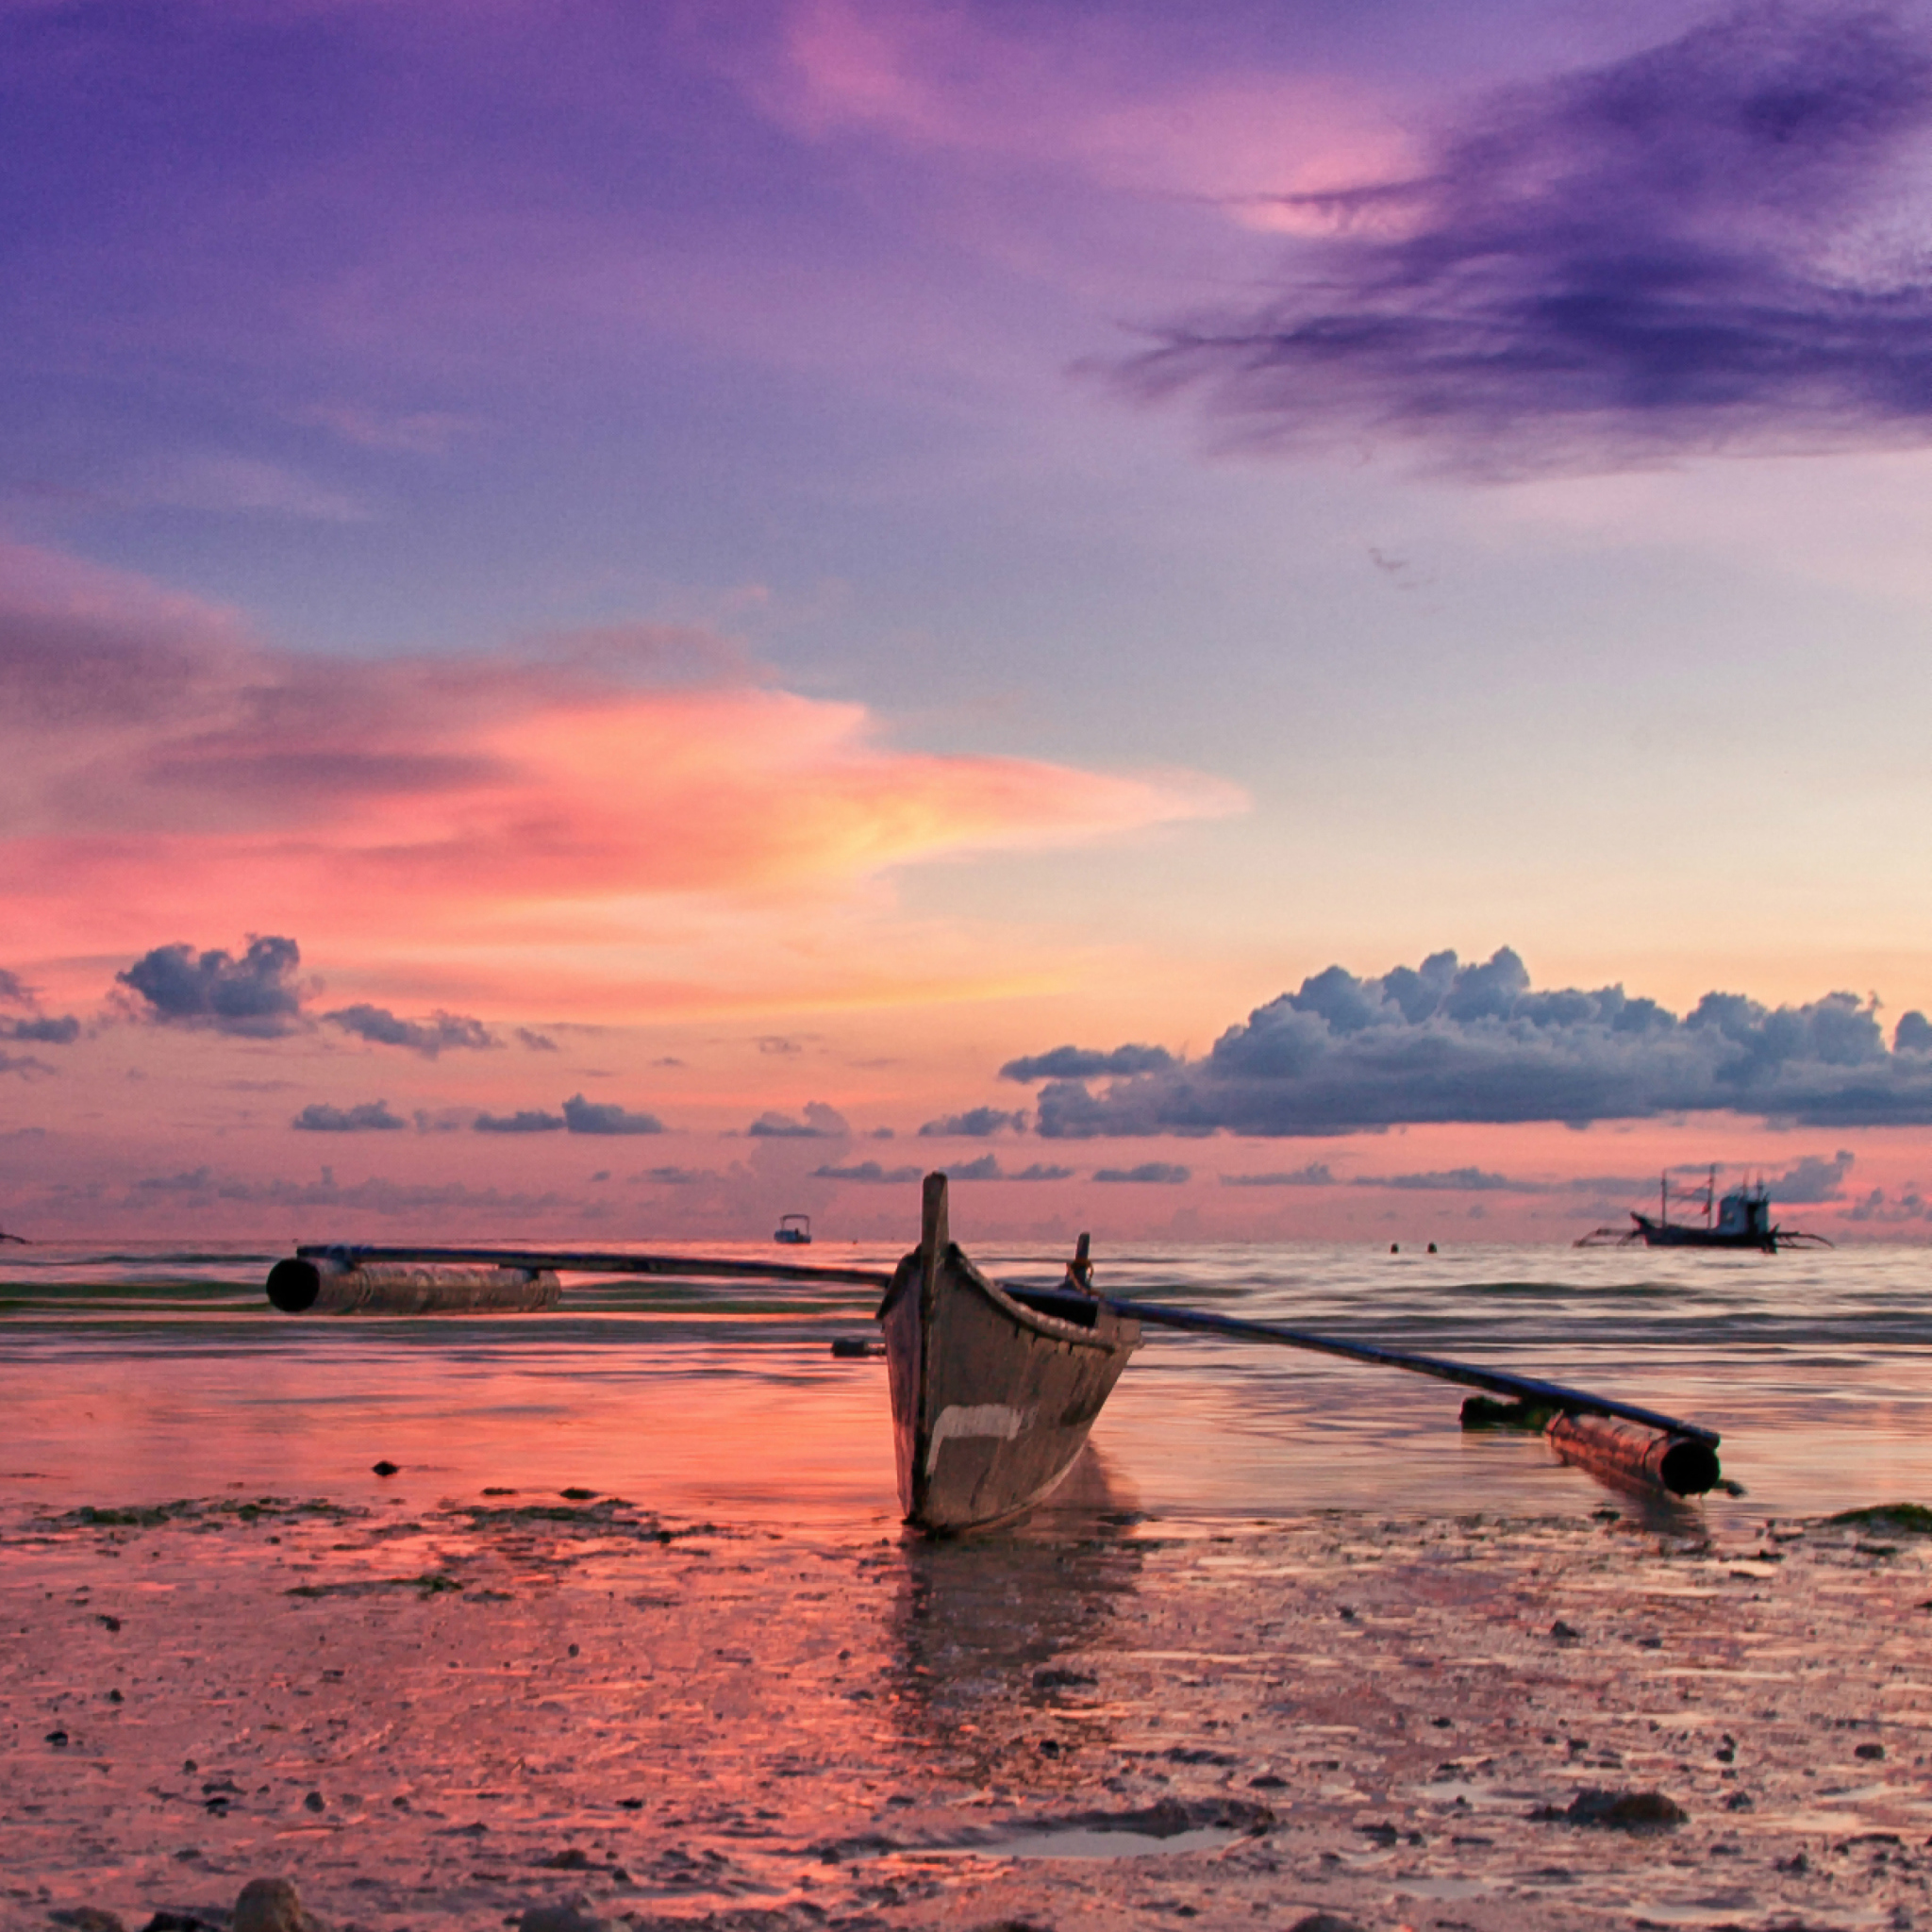 Pink Sunset And Boat At Beach In Philippines screenshot #1 2048x2048